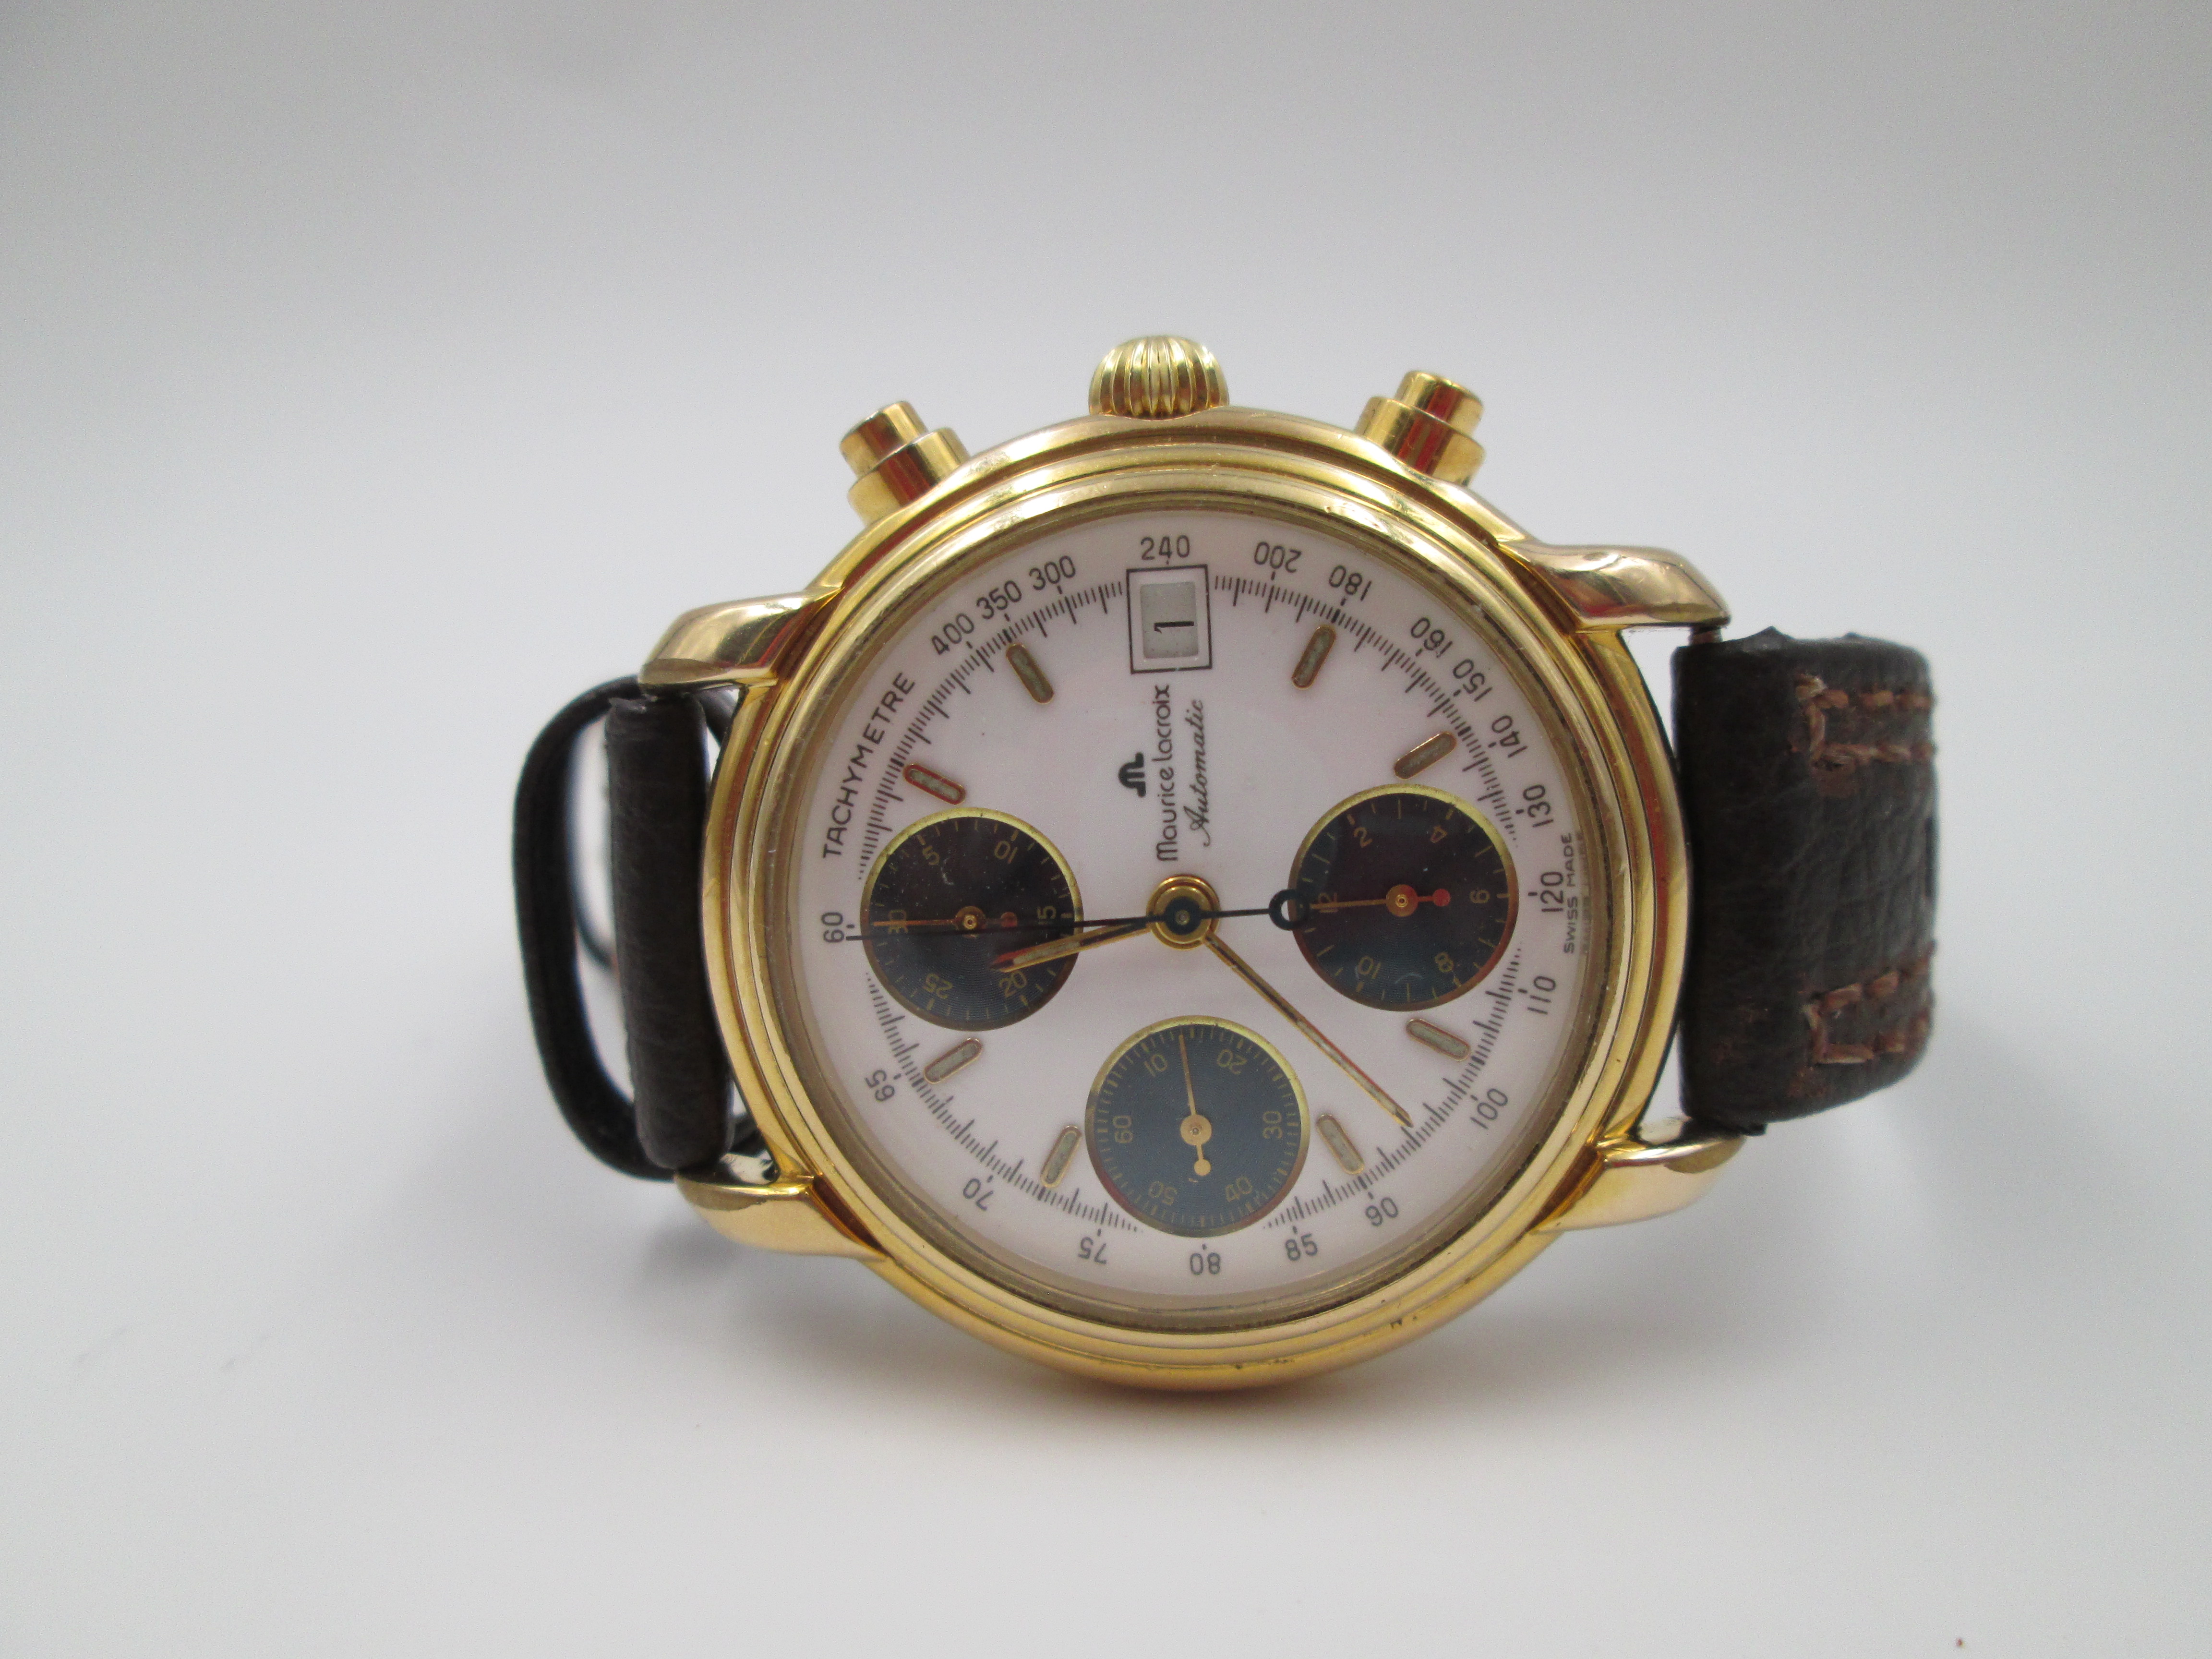 Zelden Hol Ik geloof maurice lacroix chronograph automatic steel gold plate 1995